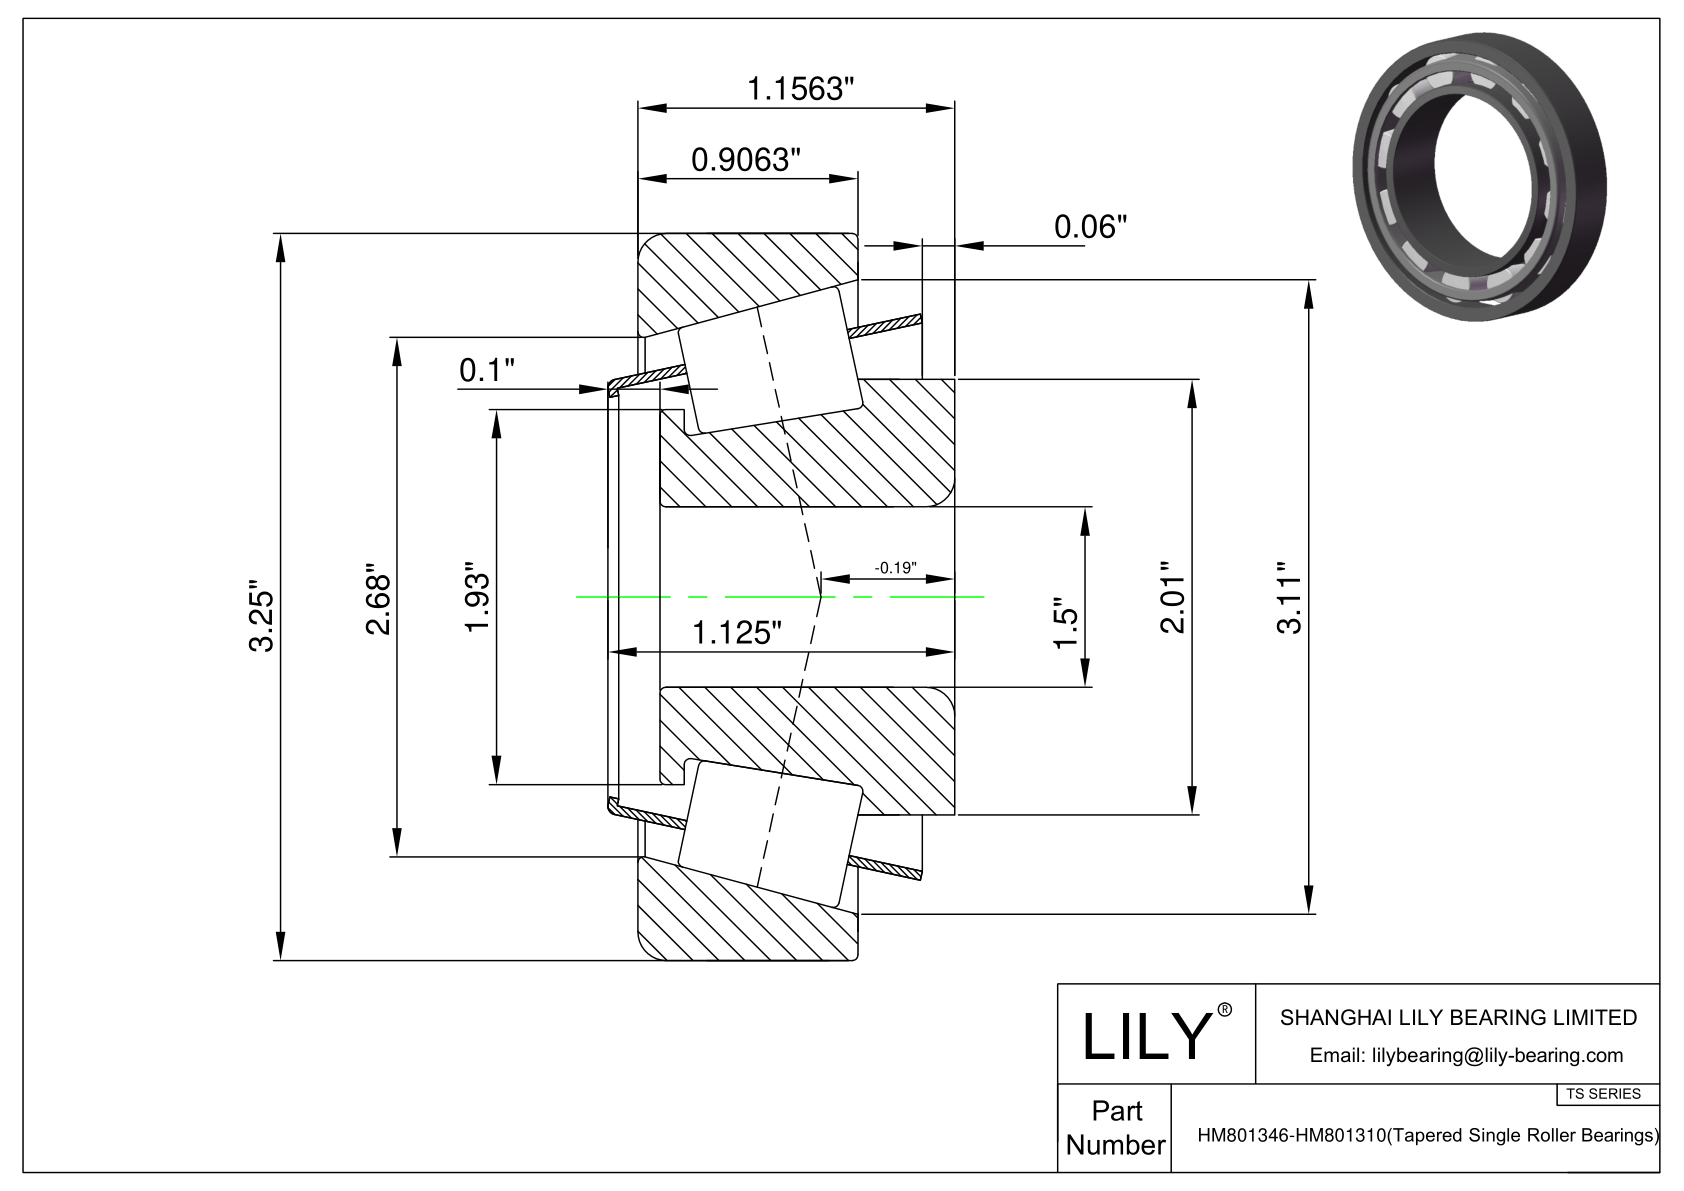 HM801346-HM801310 TS (Tapered Single Roller Bearings) (Imperial) cad drawing